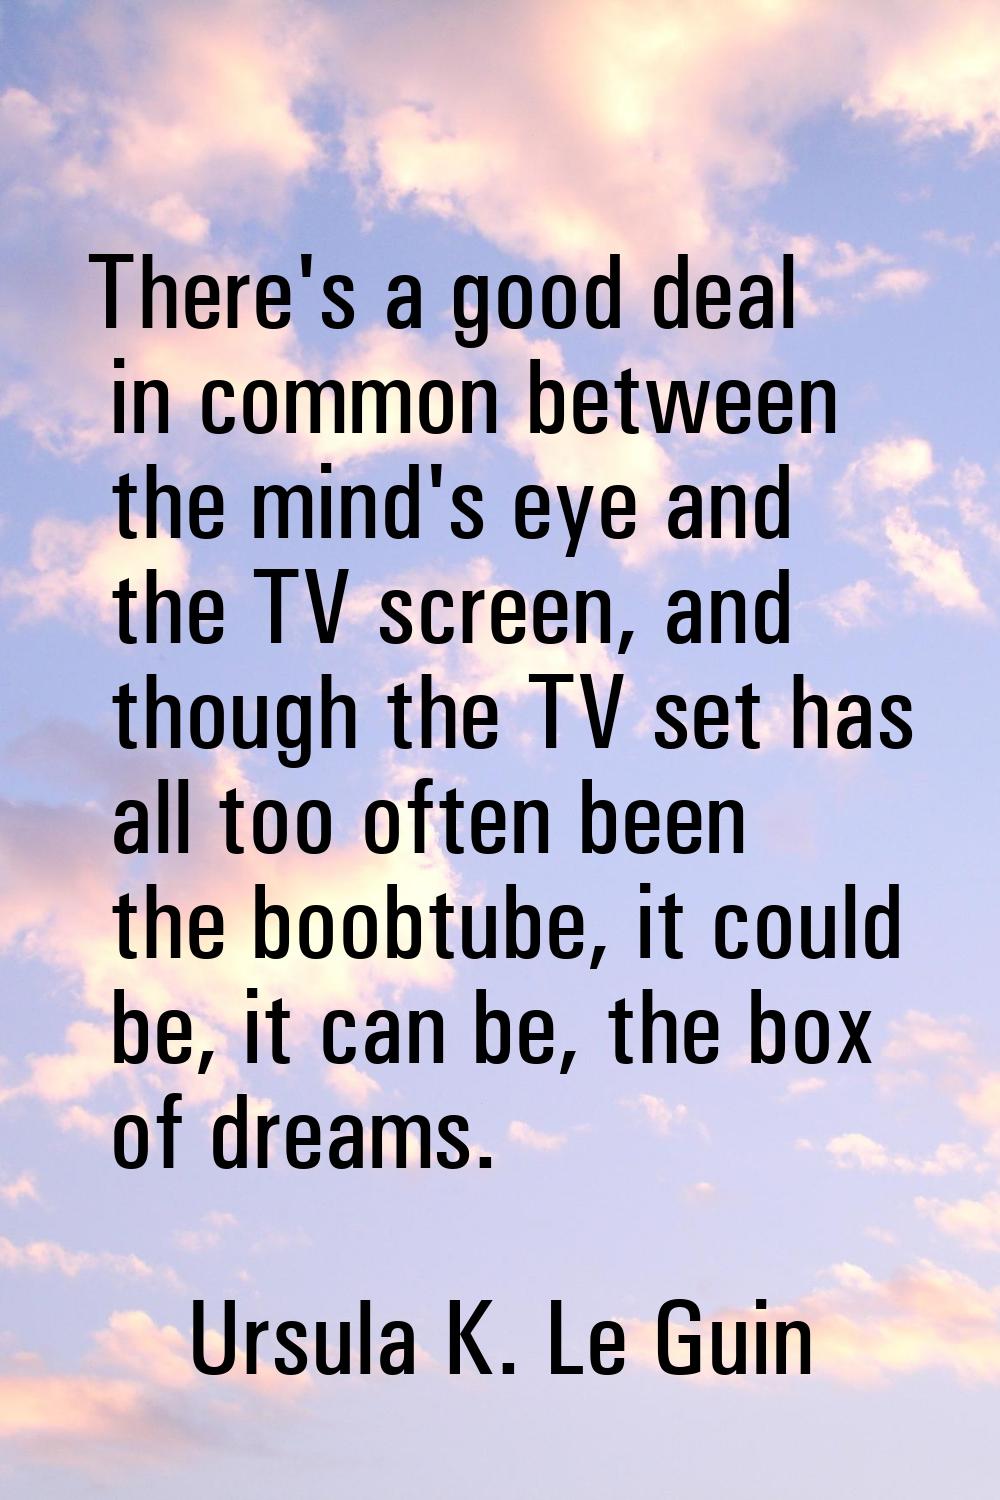 There's a good deal in common between the mind's eye and the TV screen, and though the TV set has a